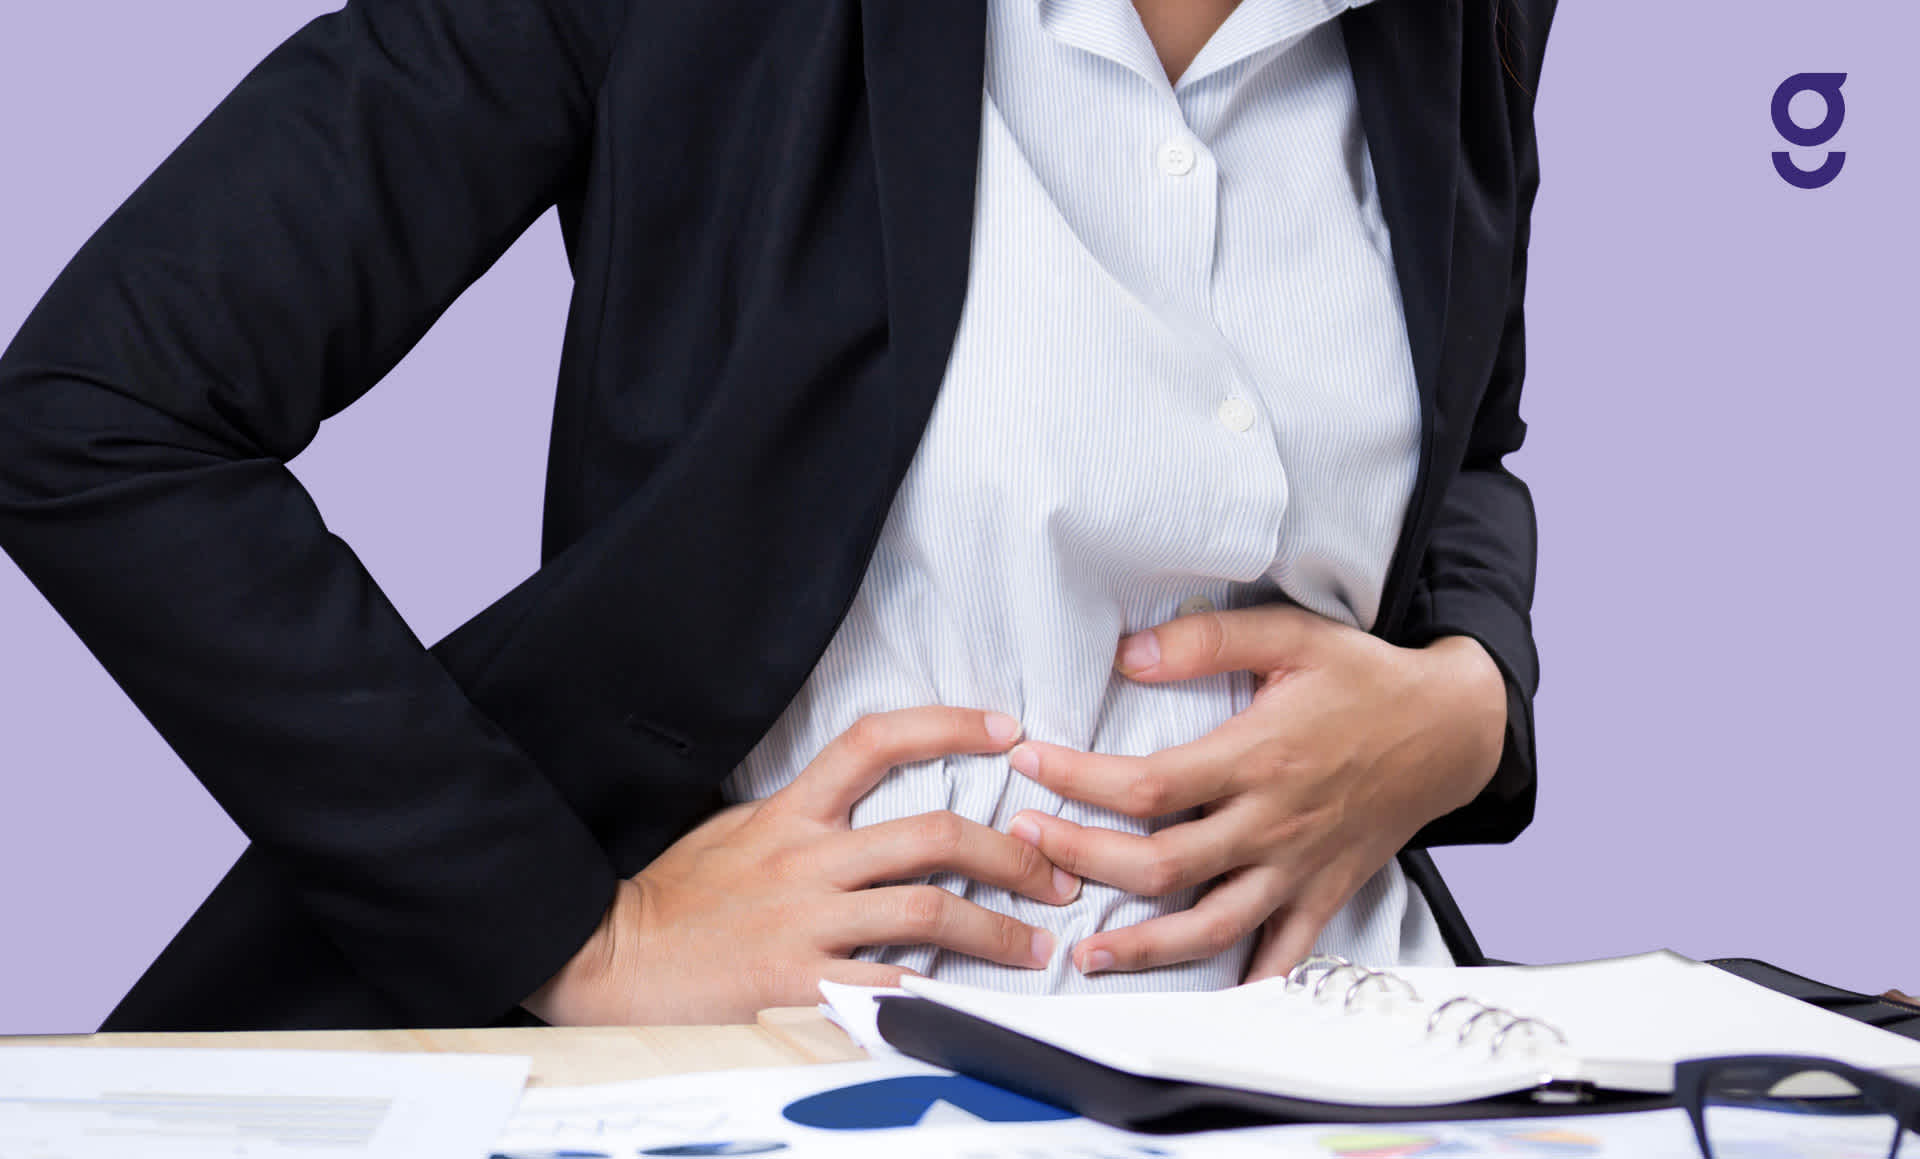 Can IBS Come On Suddenly?